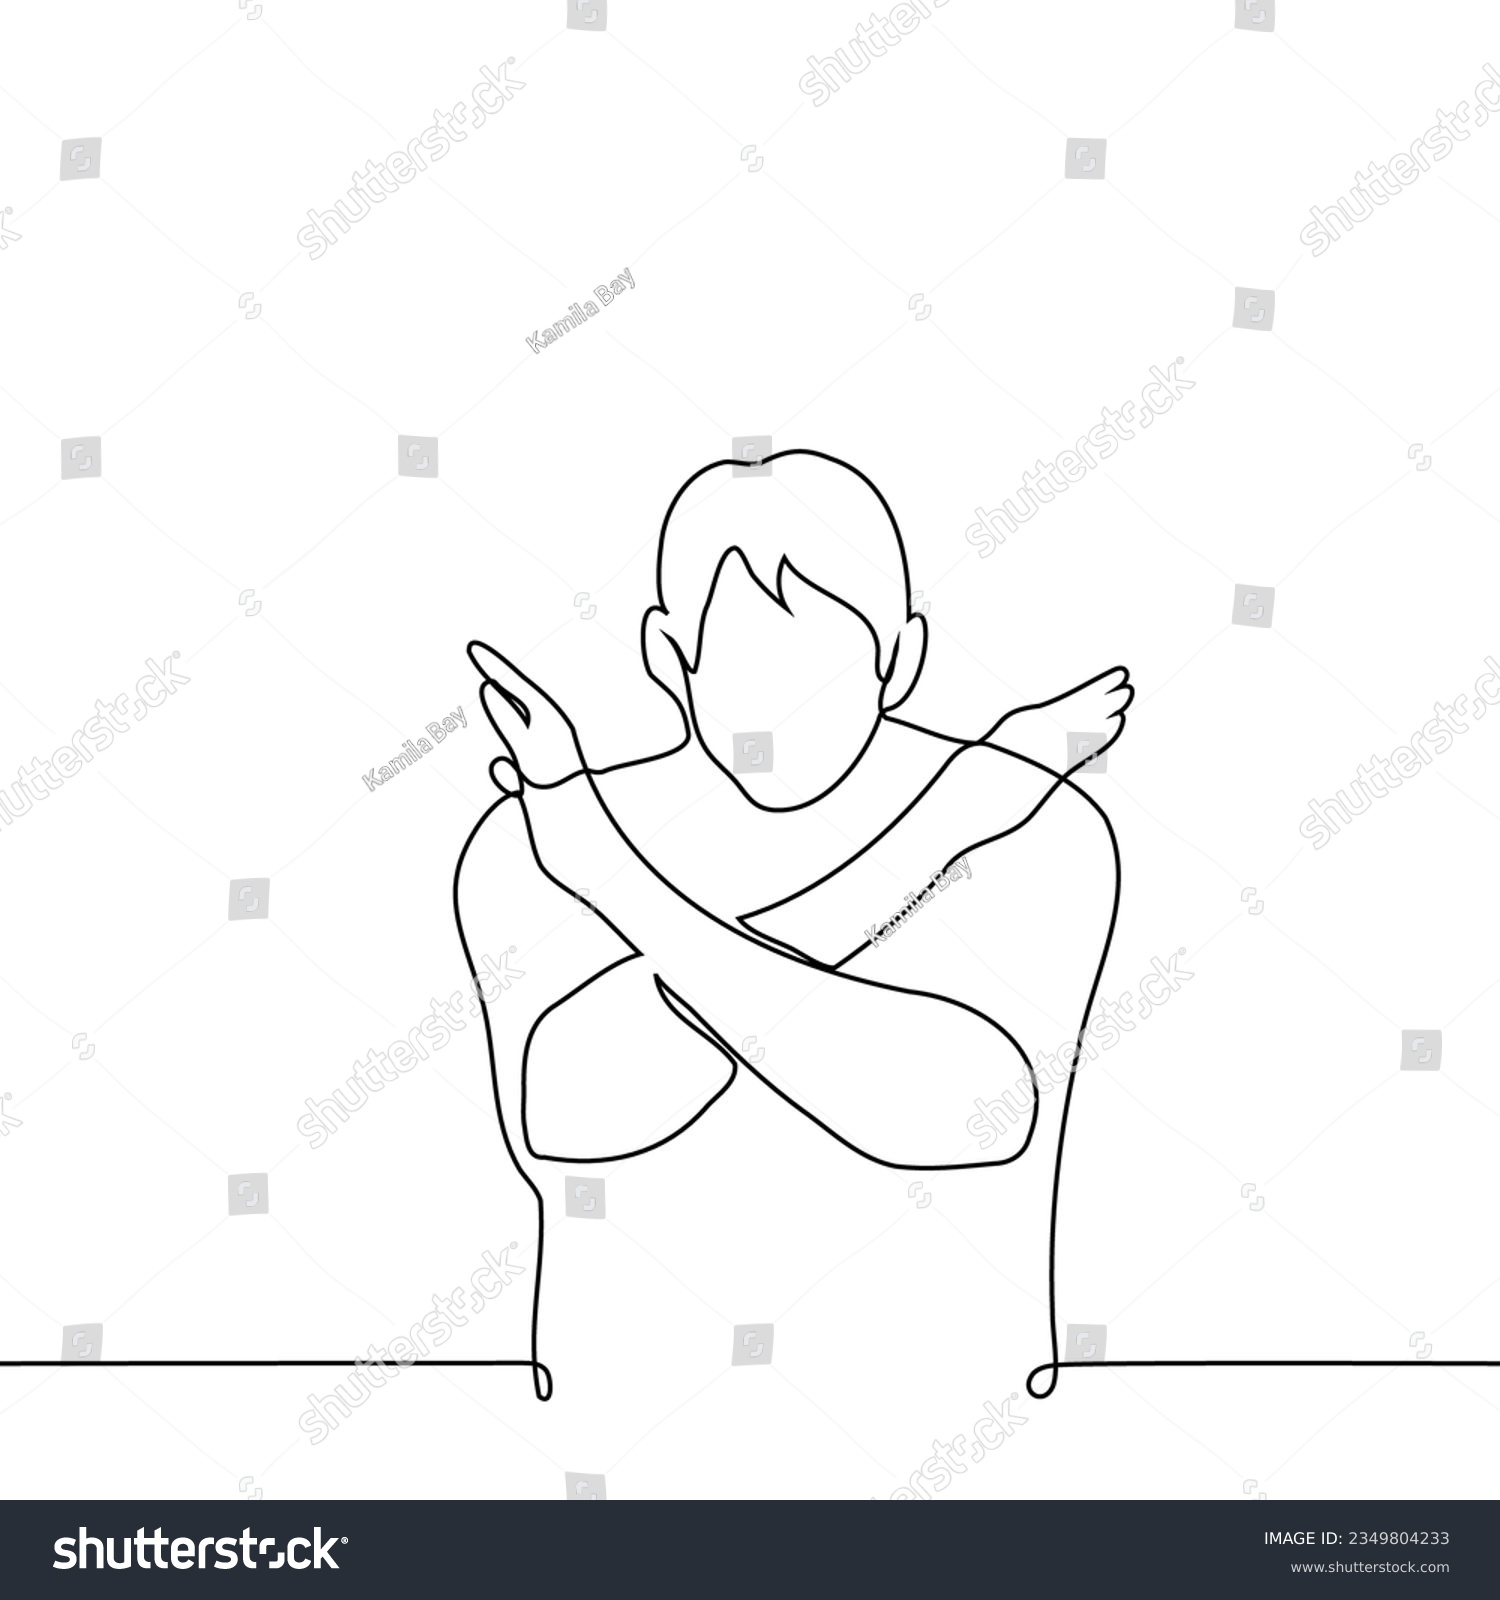 SVG of male silhouette showing crossed arms - one line art vector. the concept of prohibition, taboo, ban, outlaw status svg